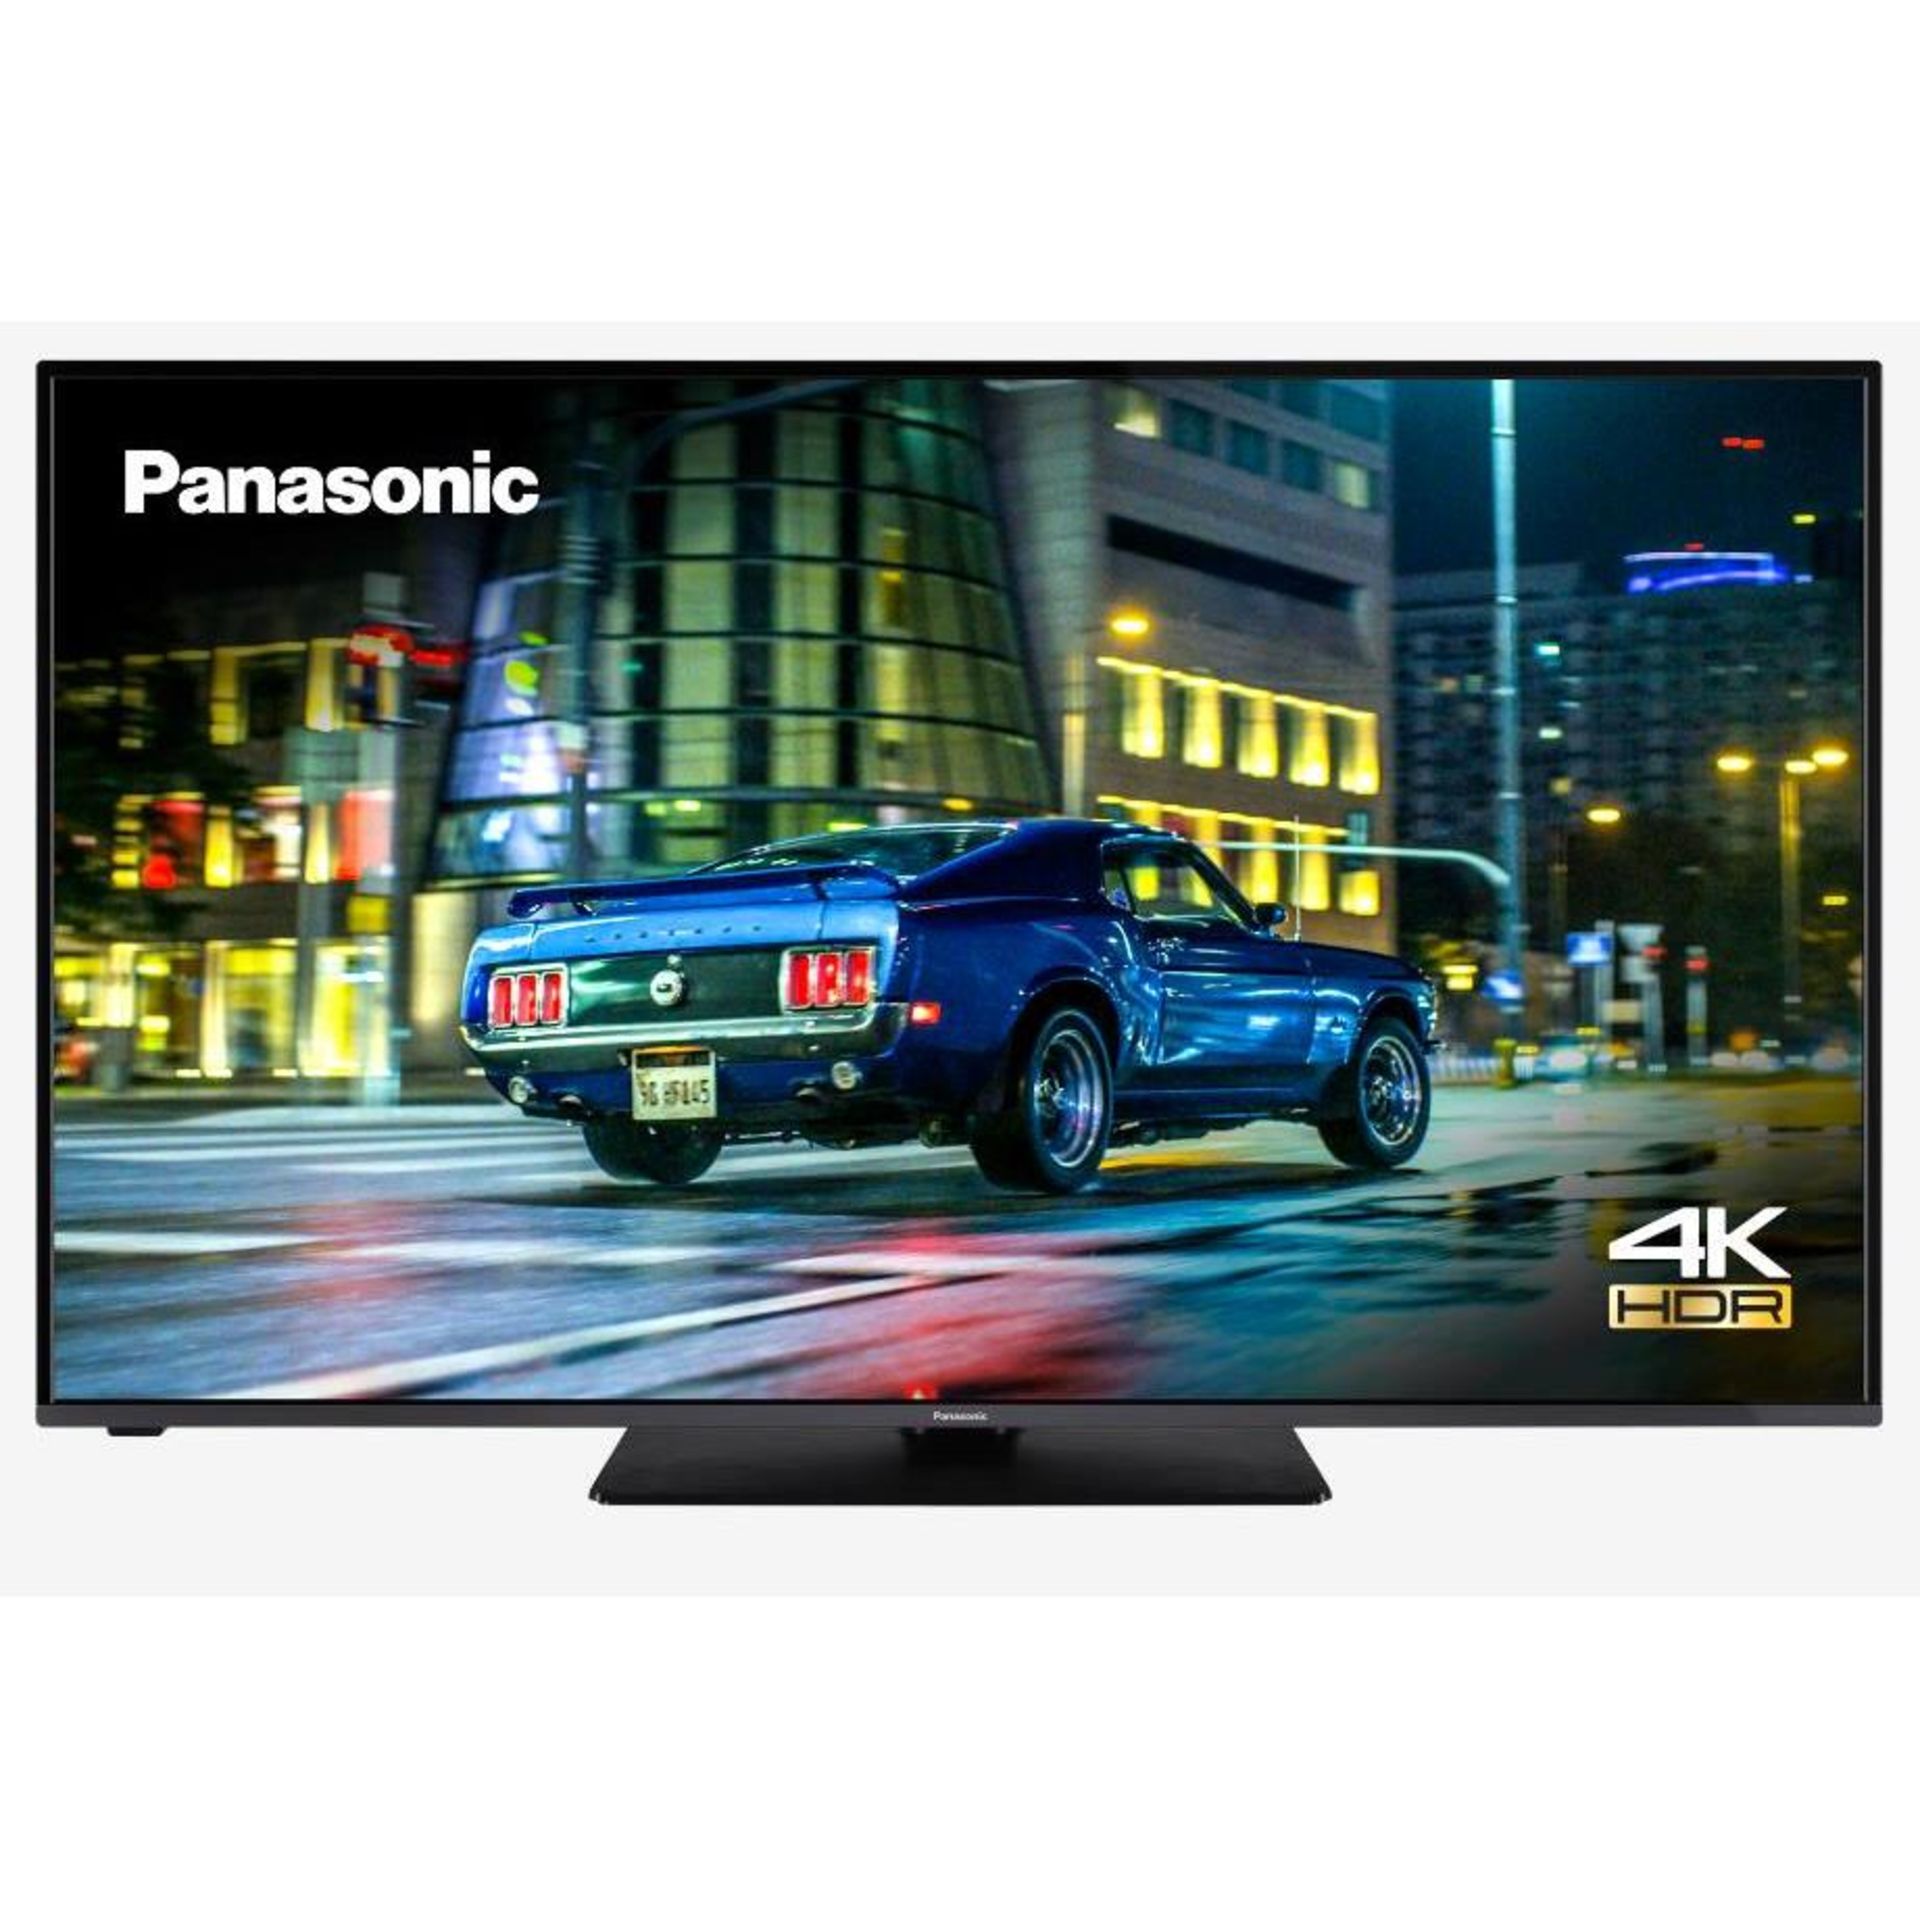 1 PANASONIC 55 INCH TX-55HX580B 4K MULTIHDR LED LCD SMART TV WITH STAND AND REMOTE RRP Â£599 (